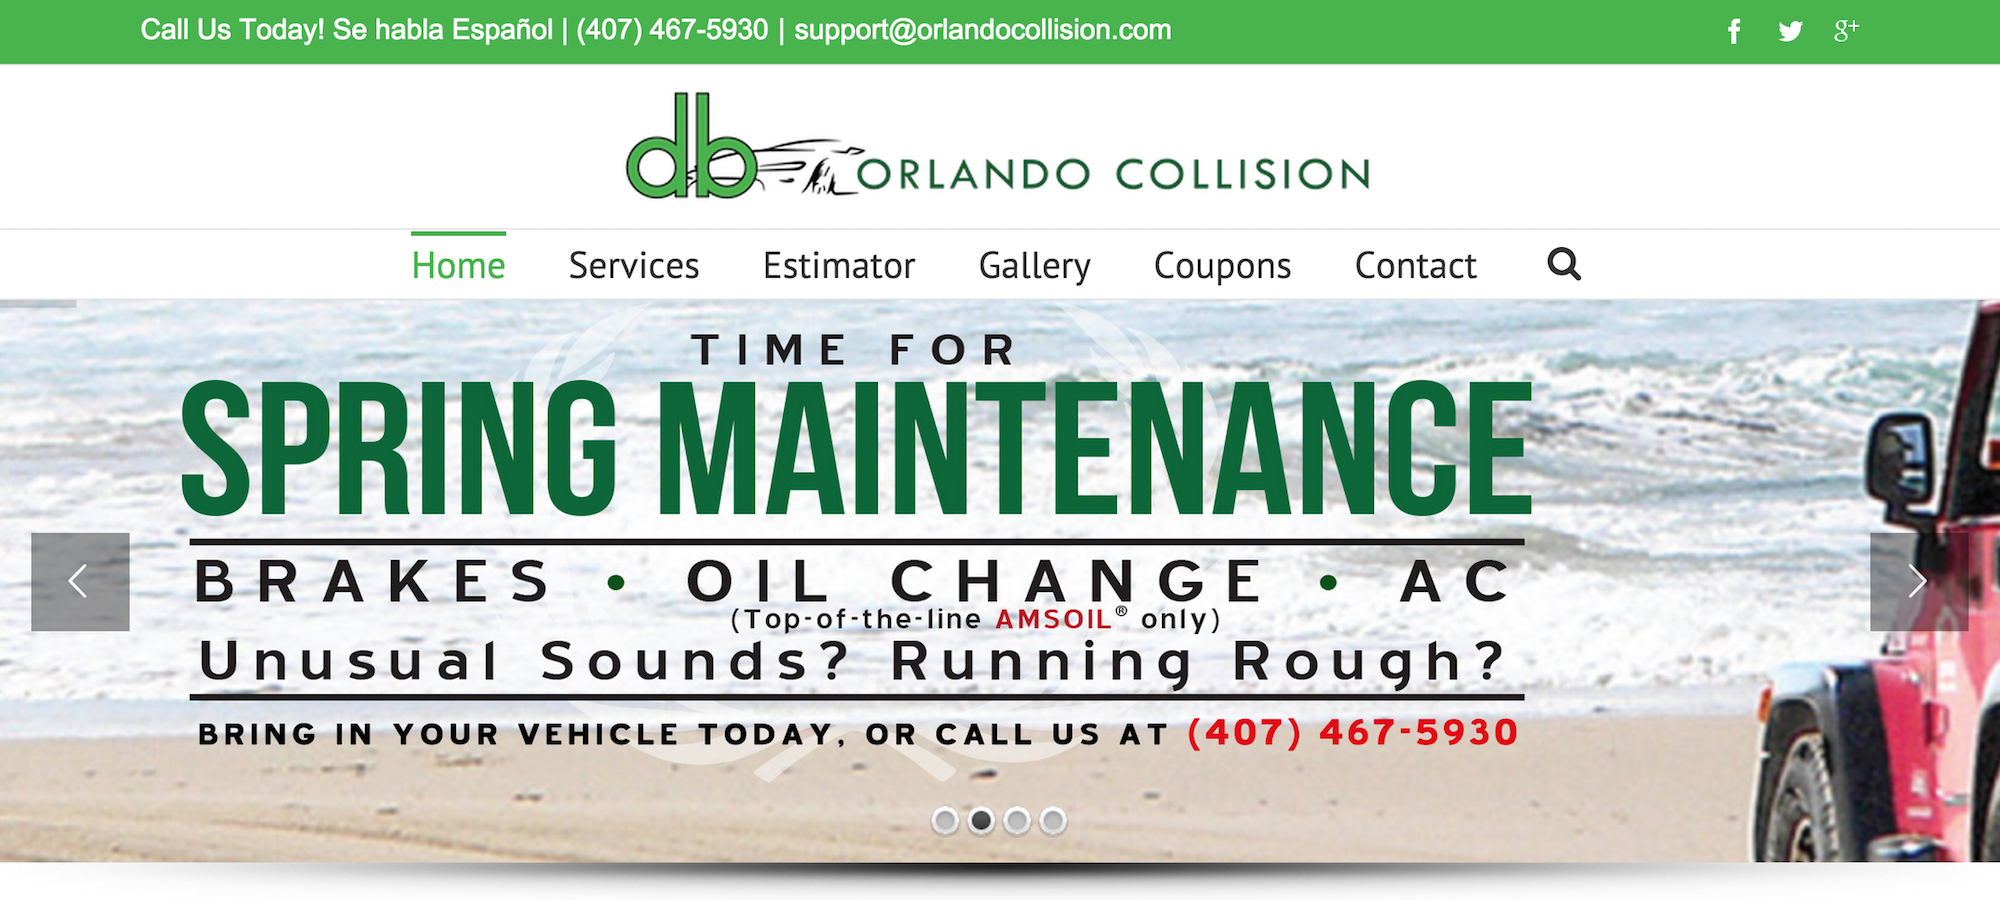 The new db Orlando Collision website by DEC Networks!